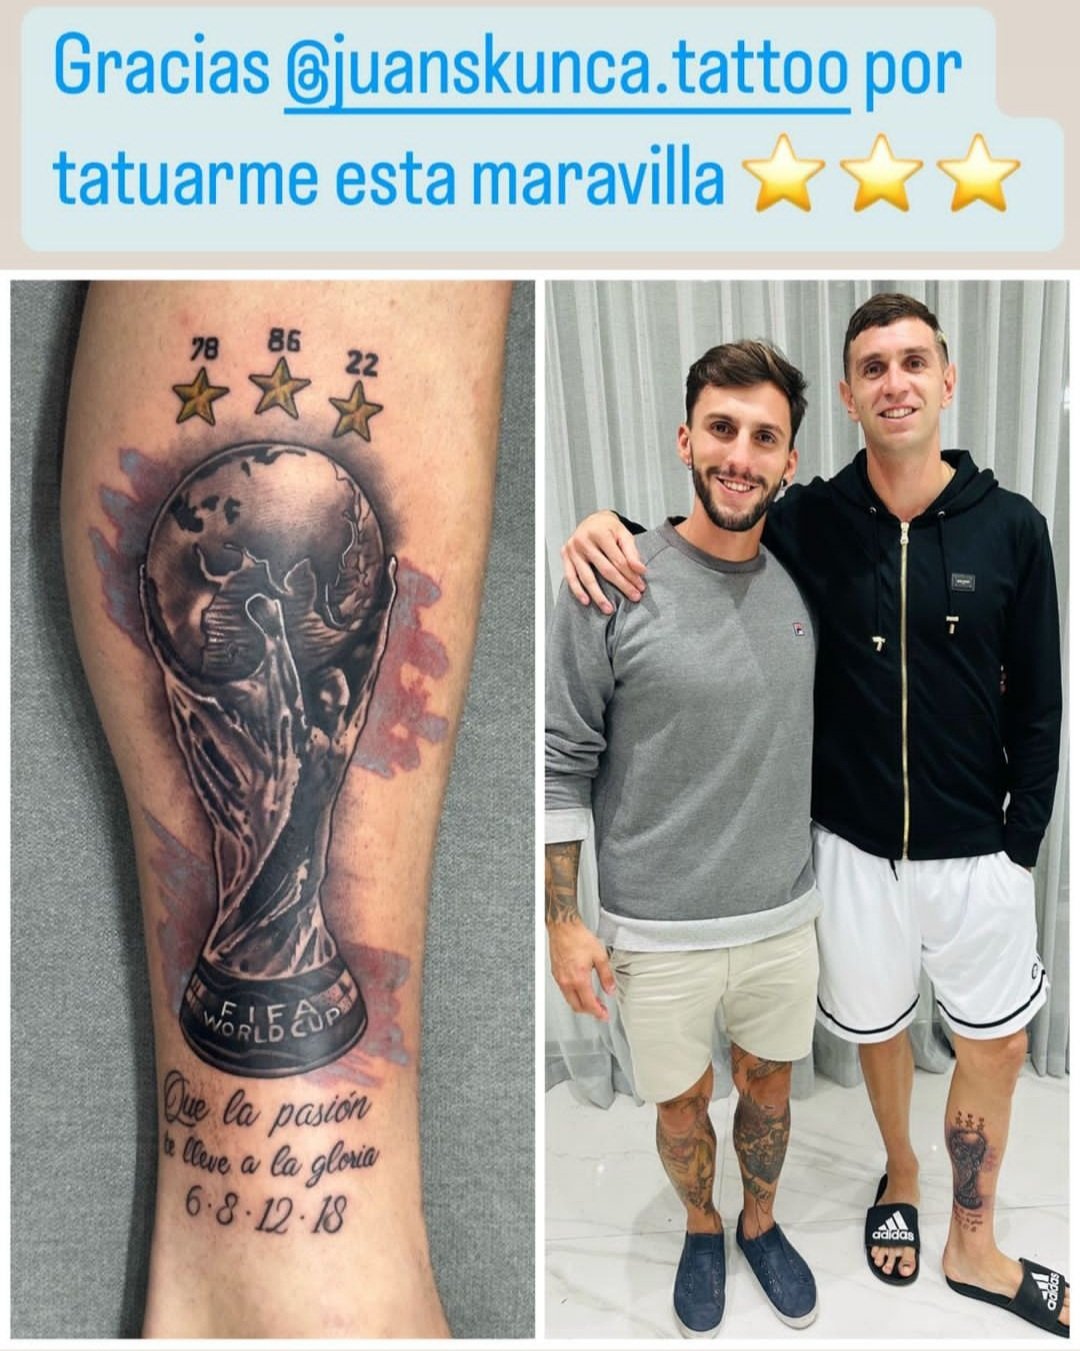 FIFA World Cup trophy tattoo located on the thigh